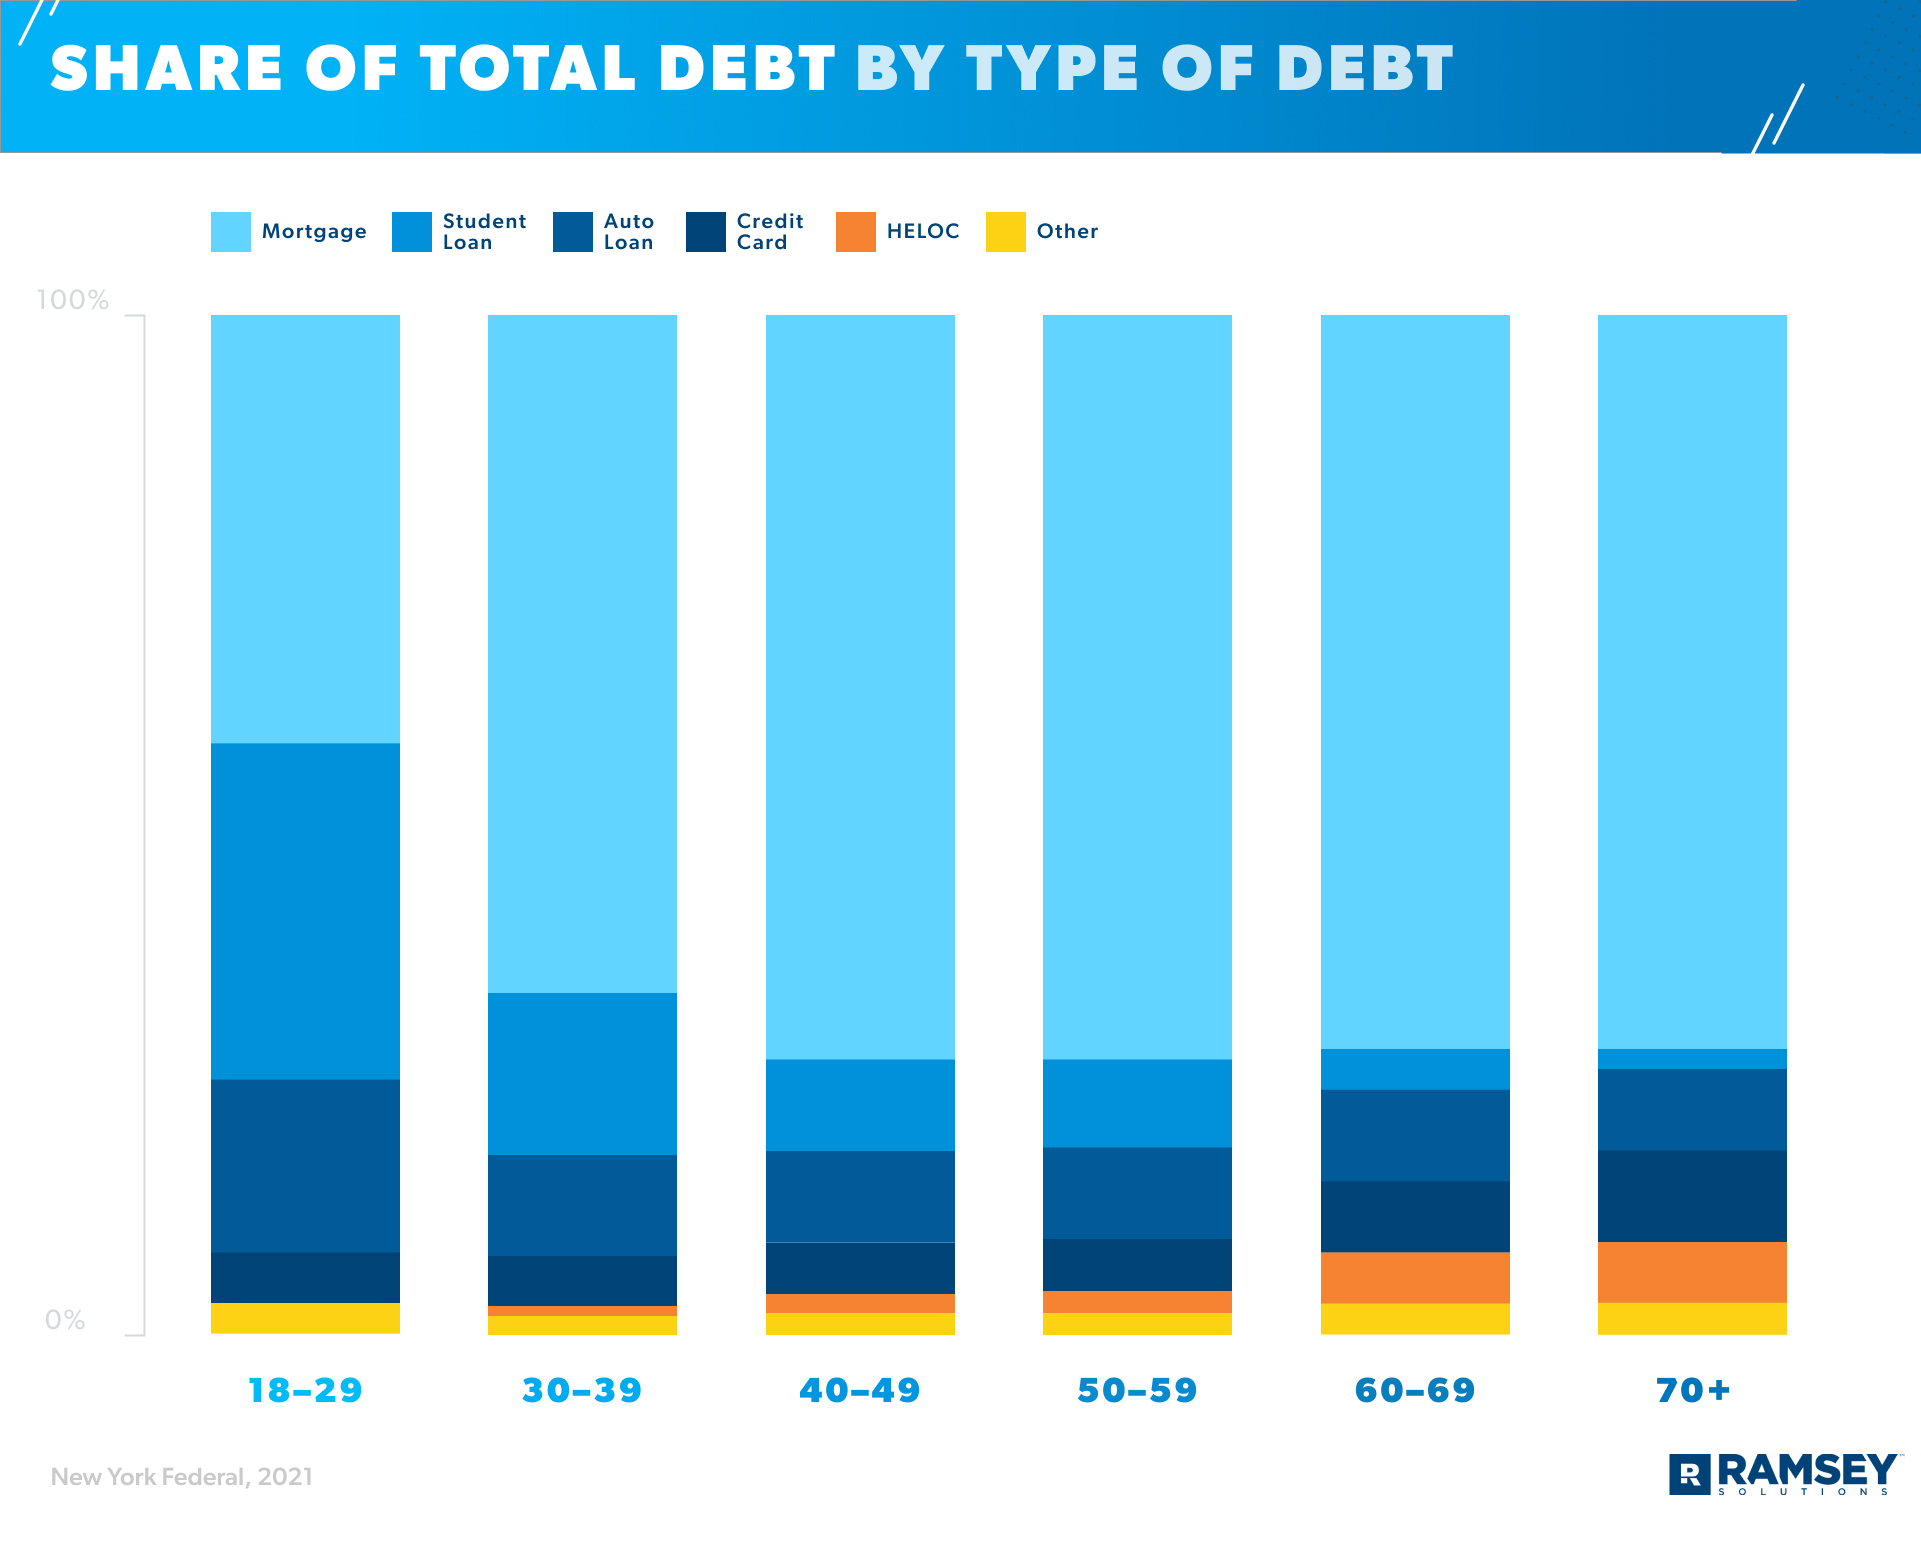 Share of Total Debt by Type of Debt